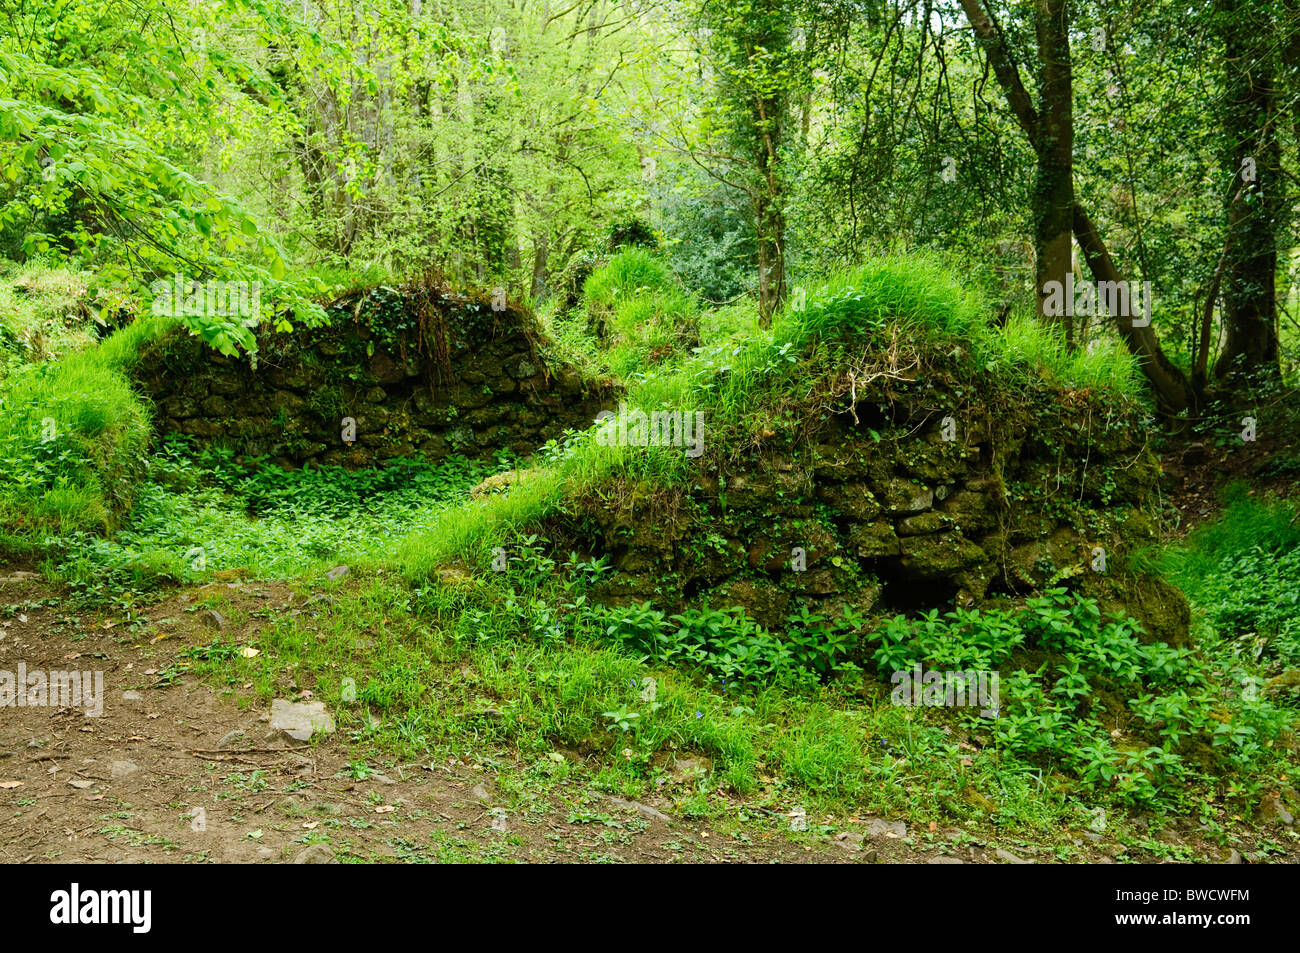 The remains of Fingle Mill in Charles Wood near the River Teign in Dartmoor National Park, Devon, England. Stock Photo